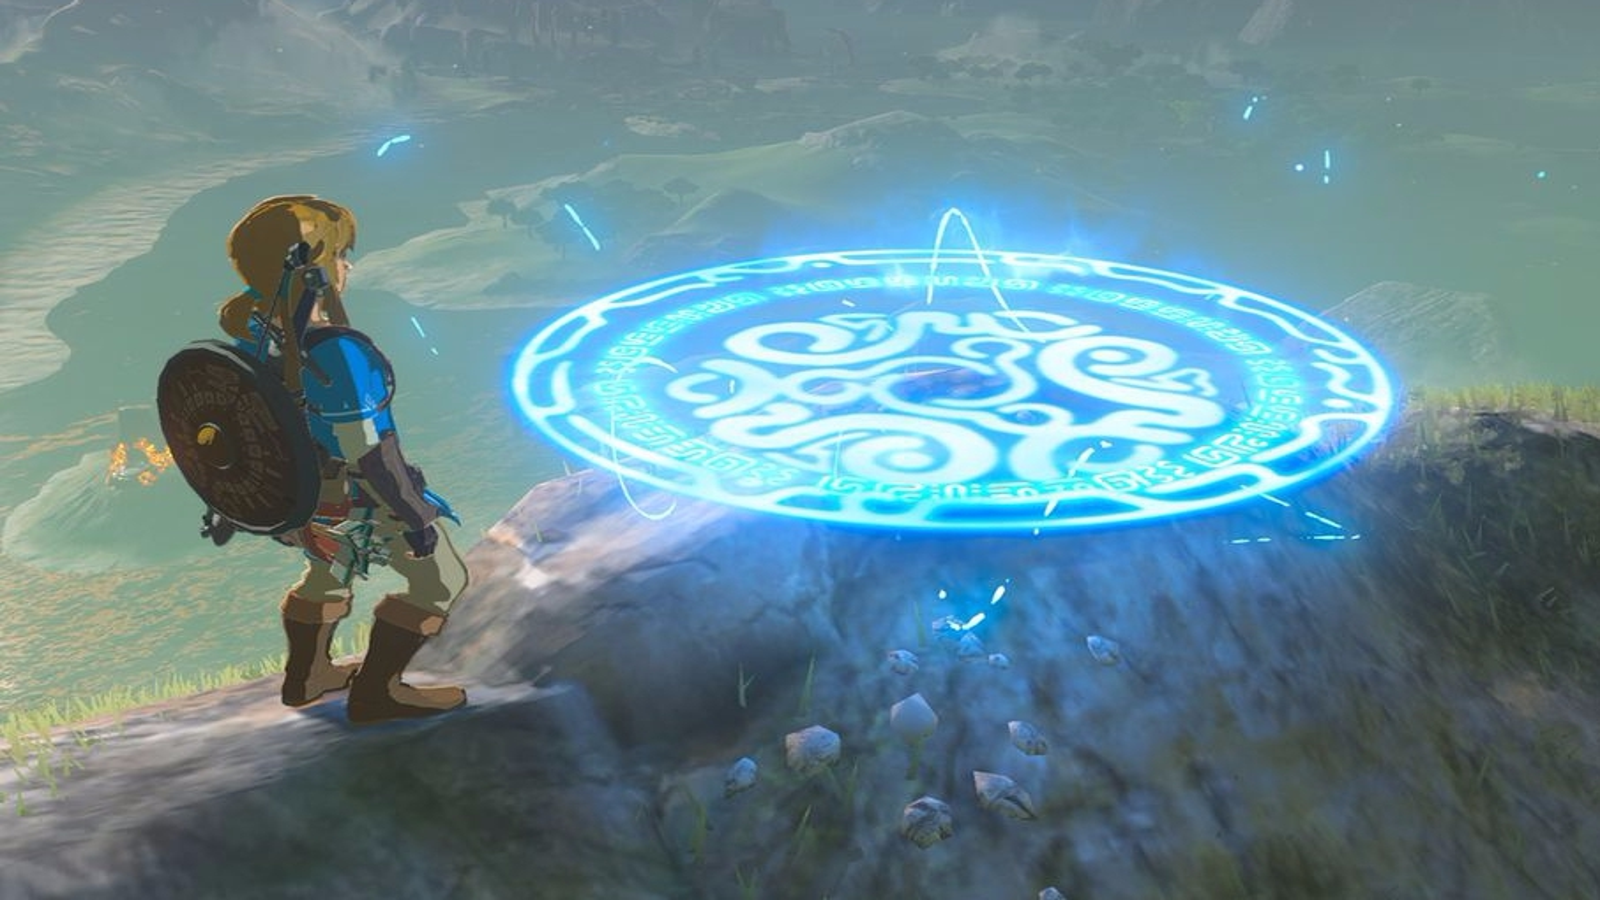 Zelda: Breath of the Wild DLC 1 guide: The Master Trials explained